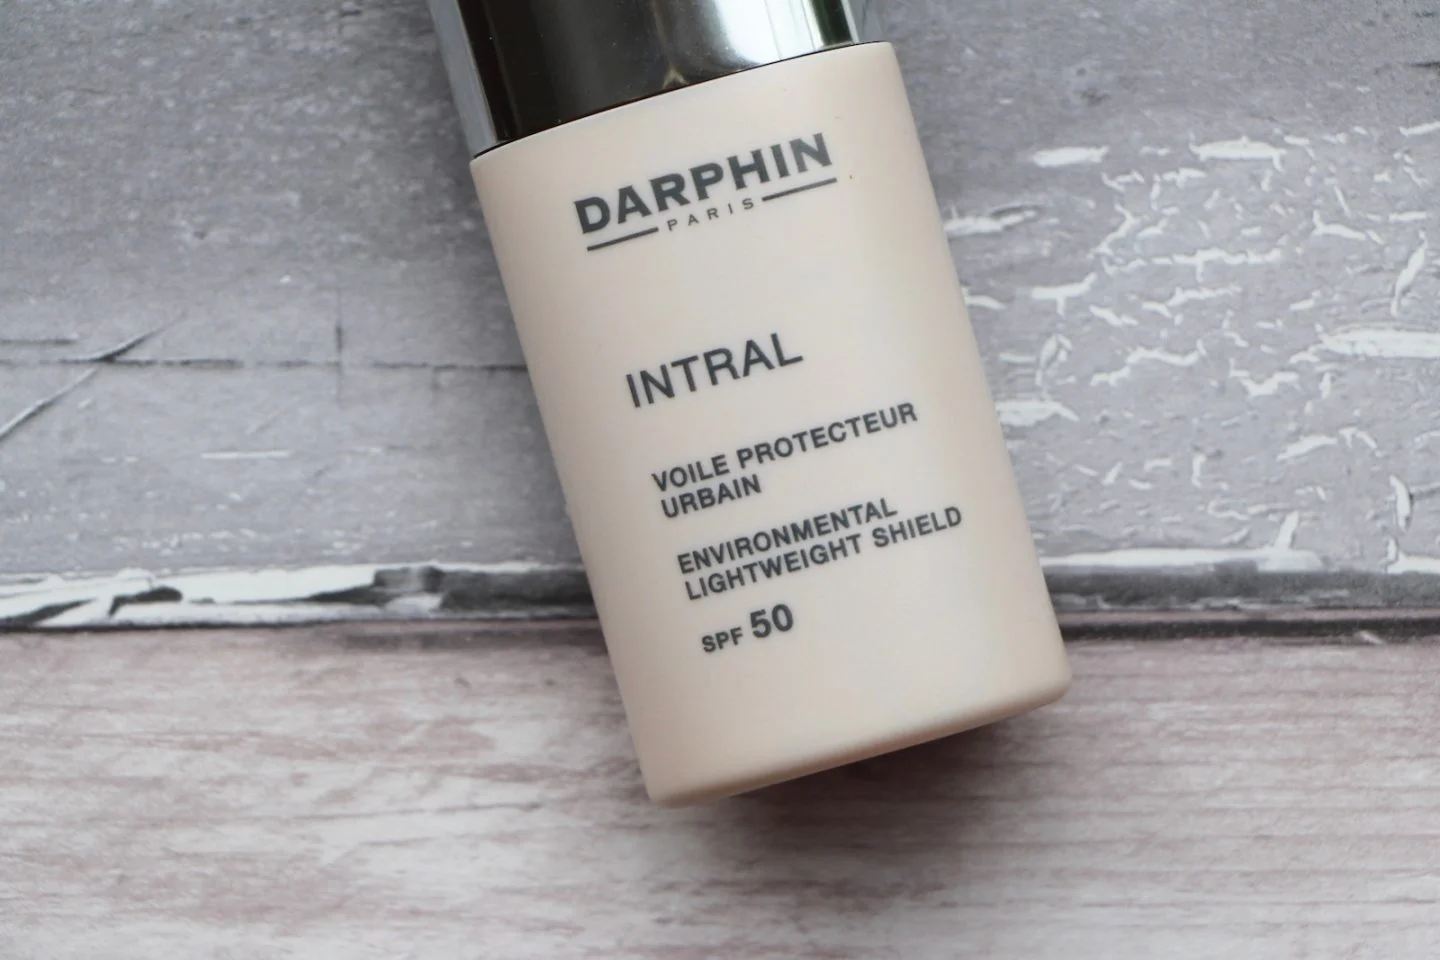 darphin spf 50 intral review